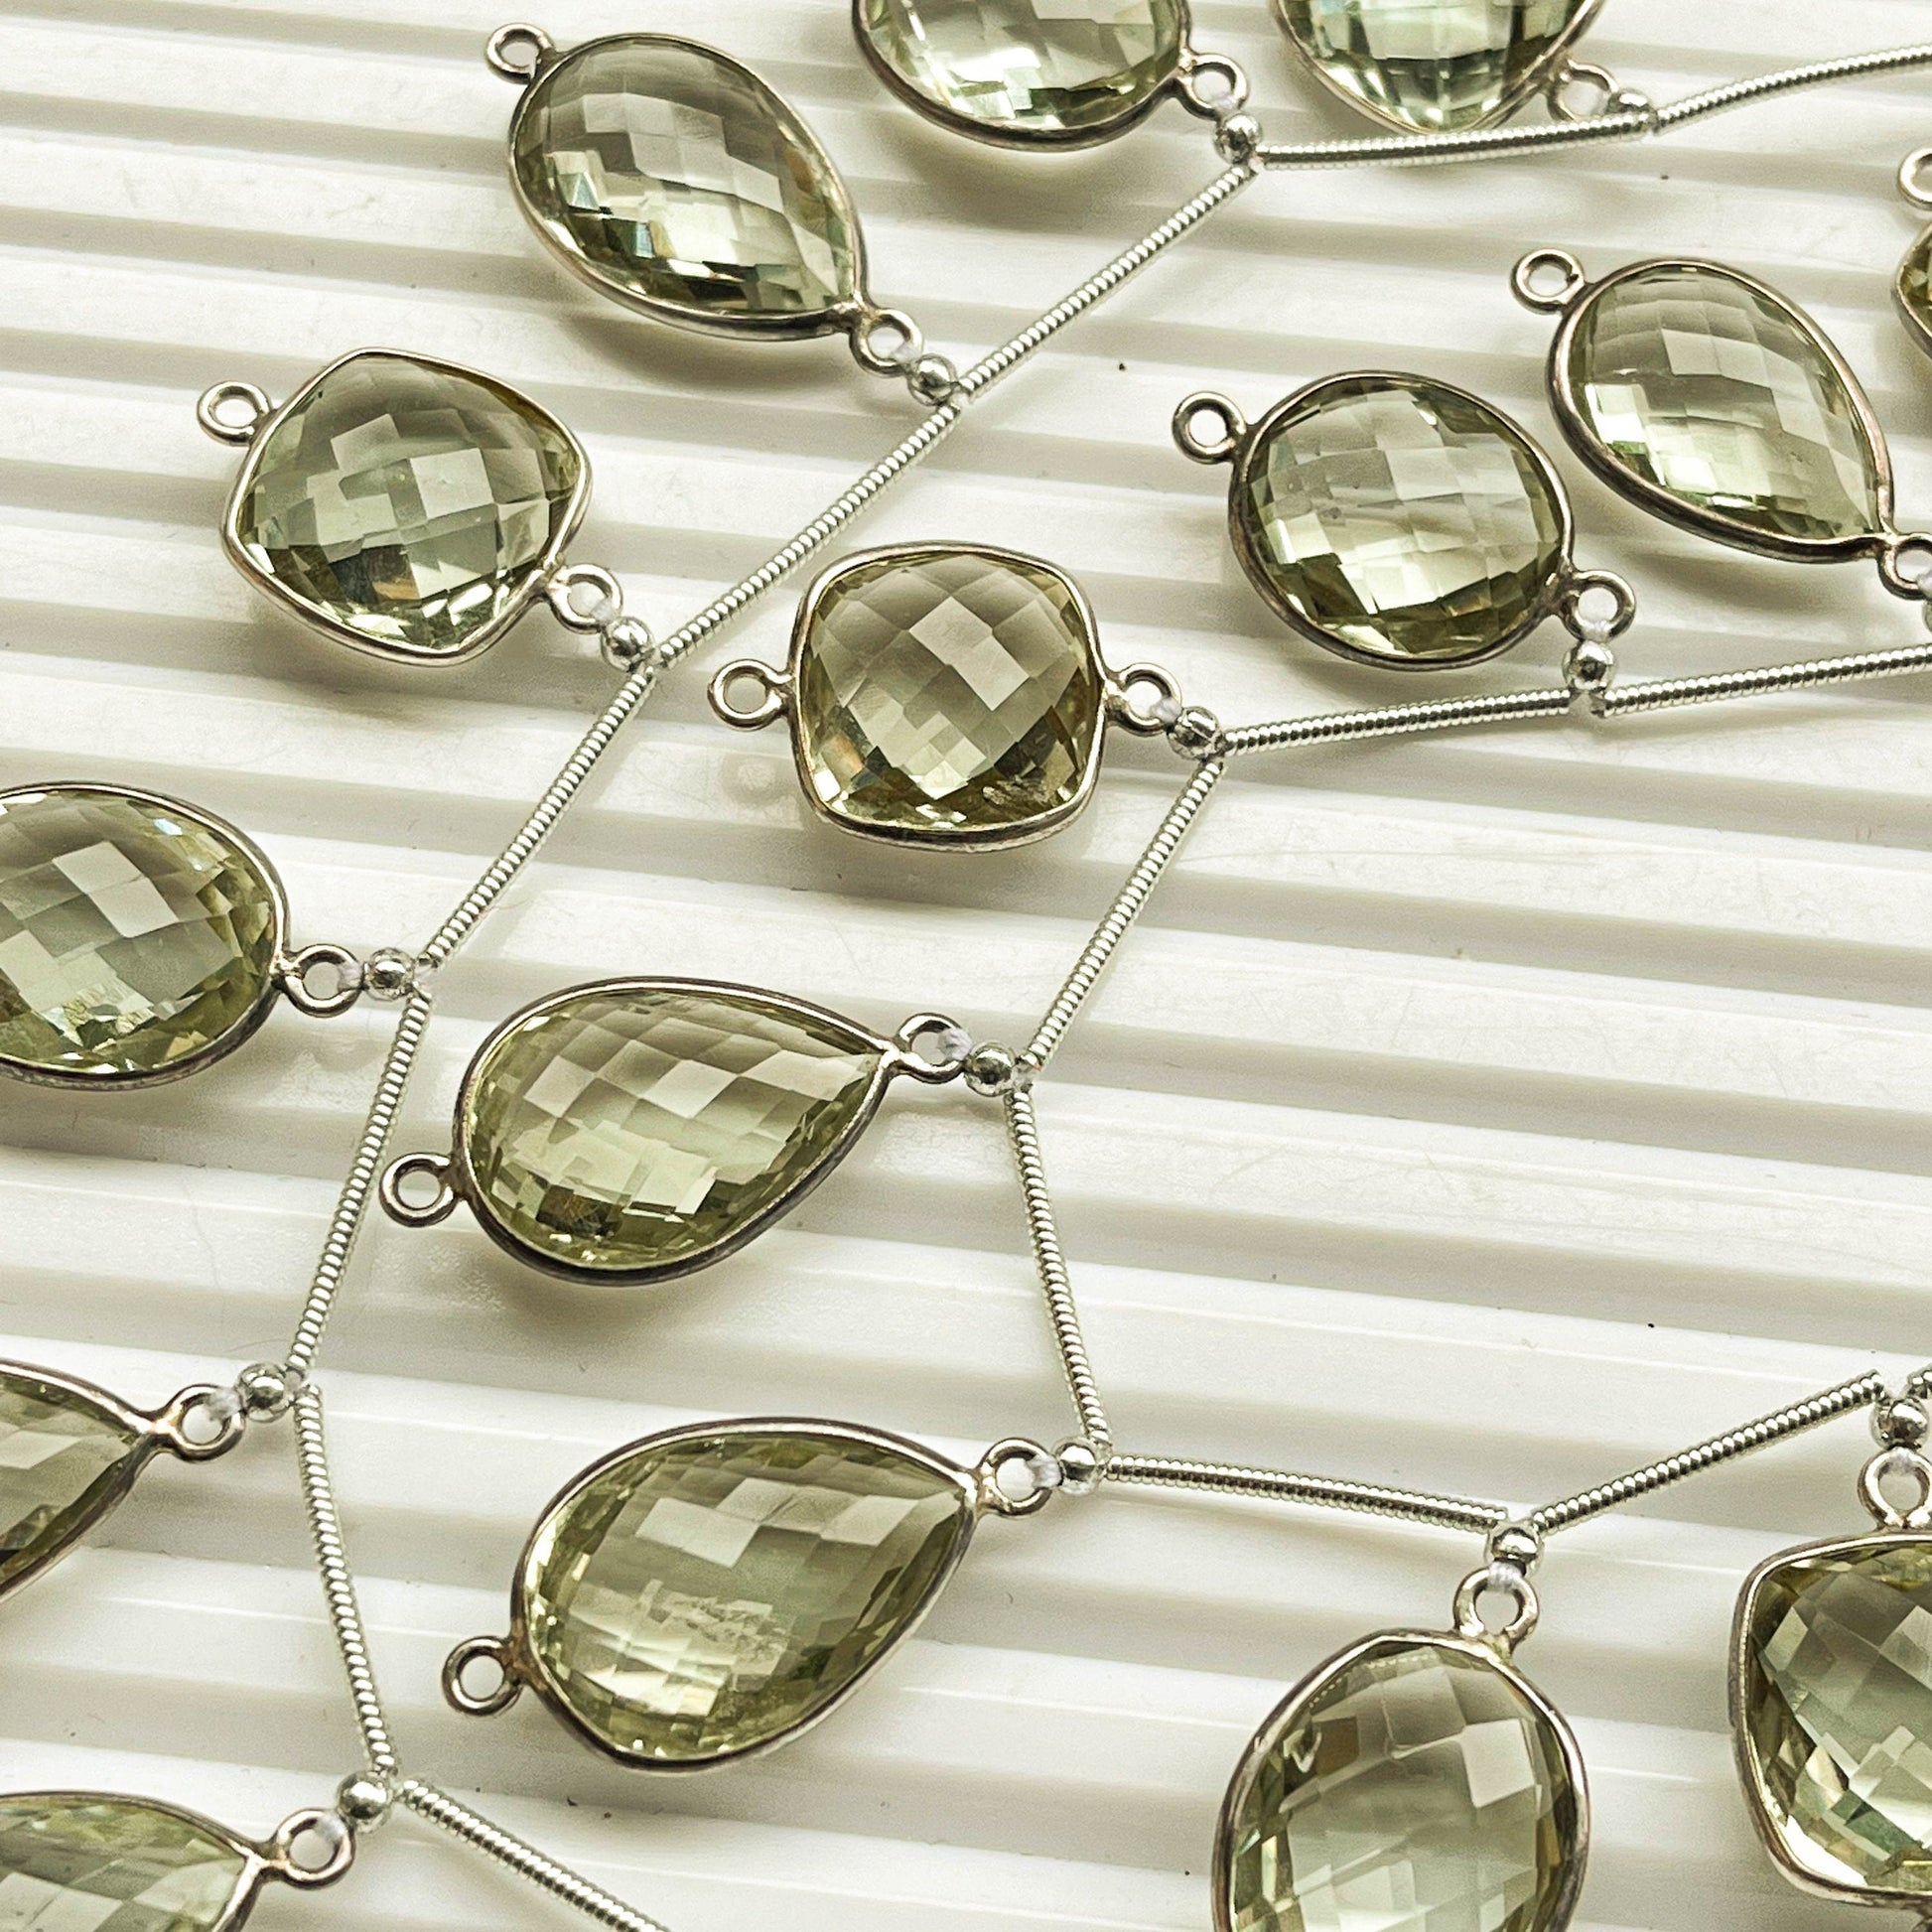 12 Pieces Green Amethyst Briolette Mix Shape Pair 925 Silver bezel set Connectors for Jewelry making Beadsforyourjewelry